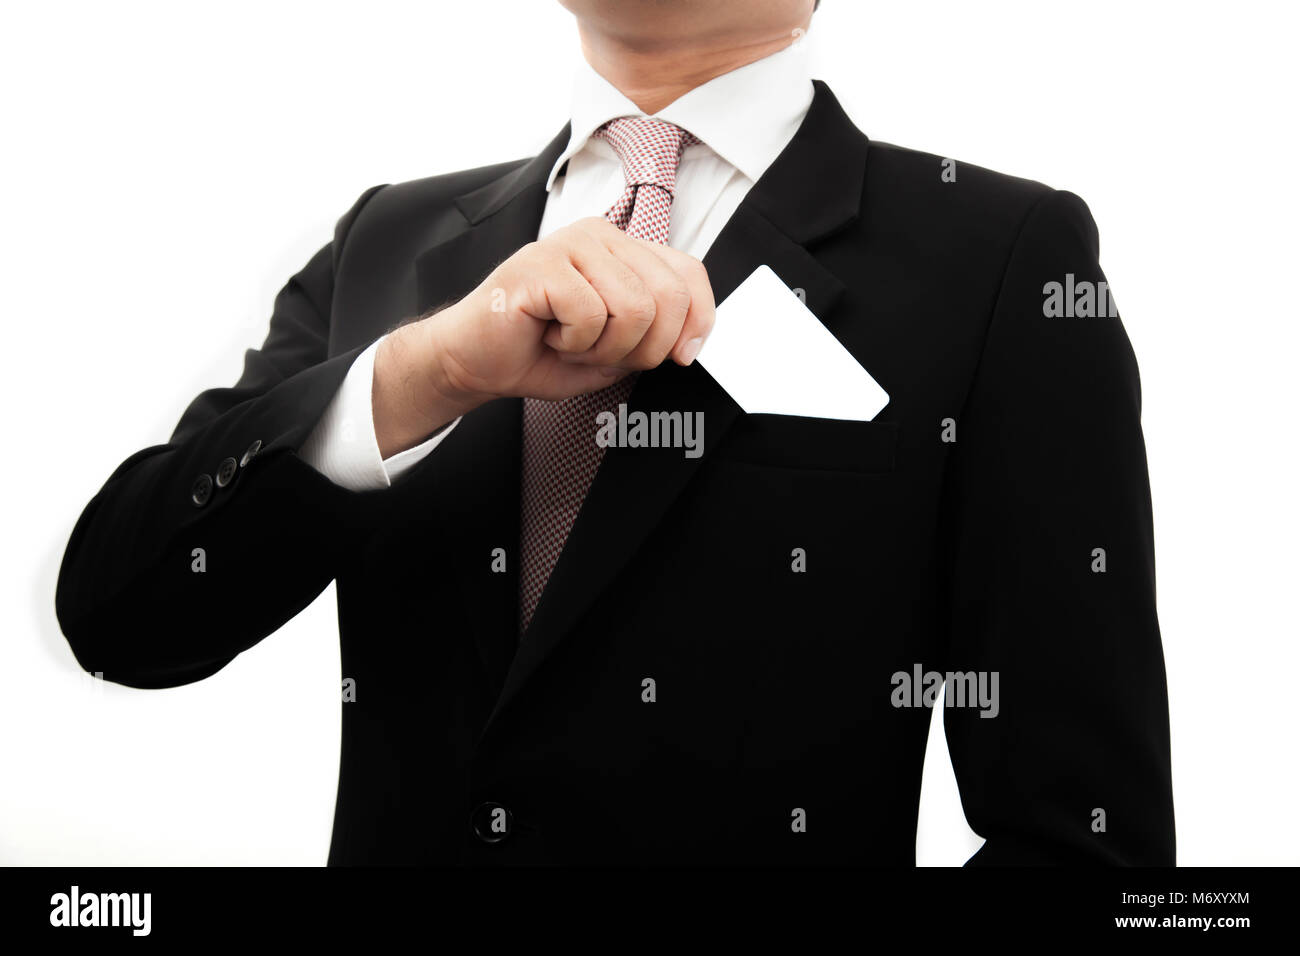 Businessman picked the card out of his pocket. Stock Photo